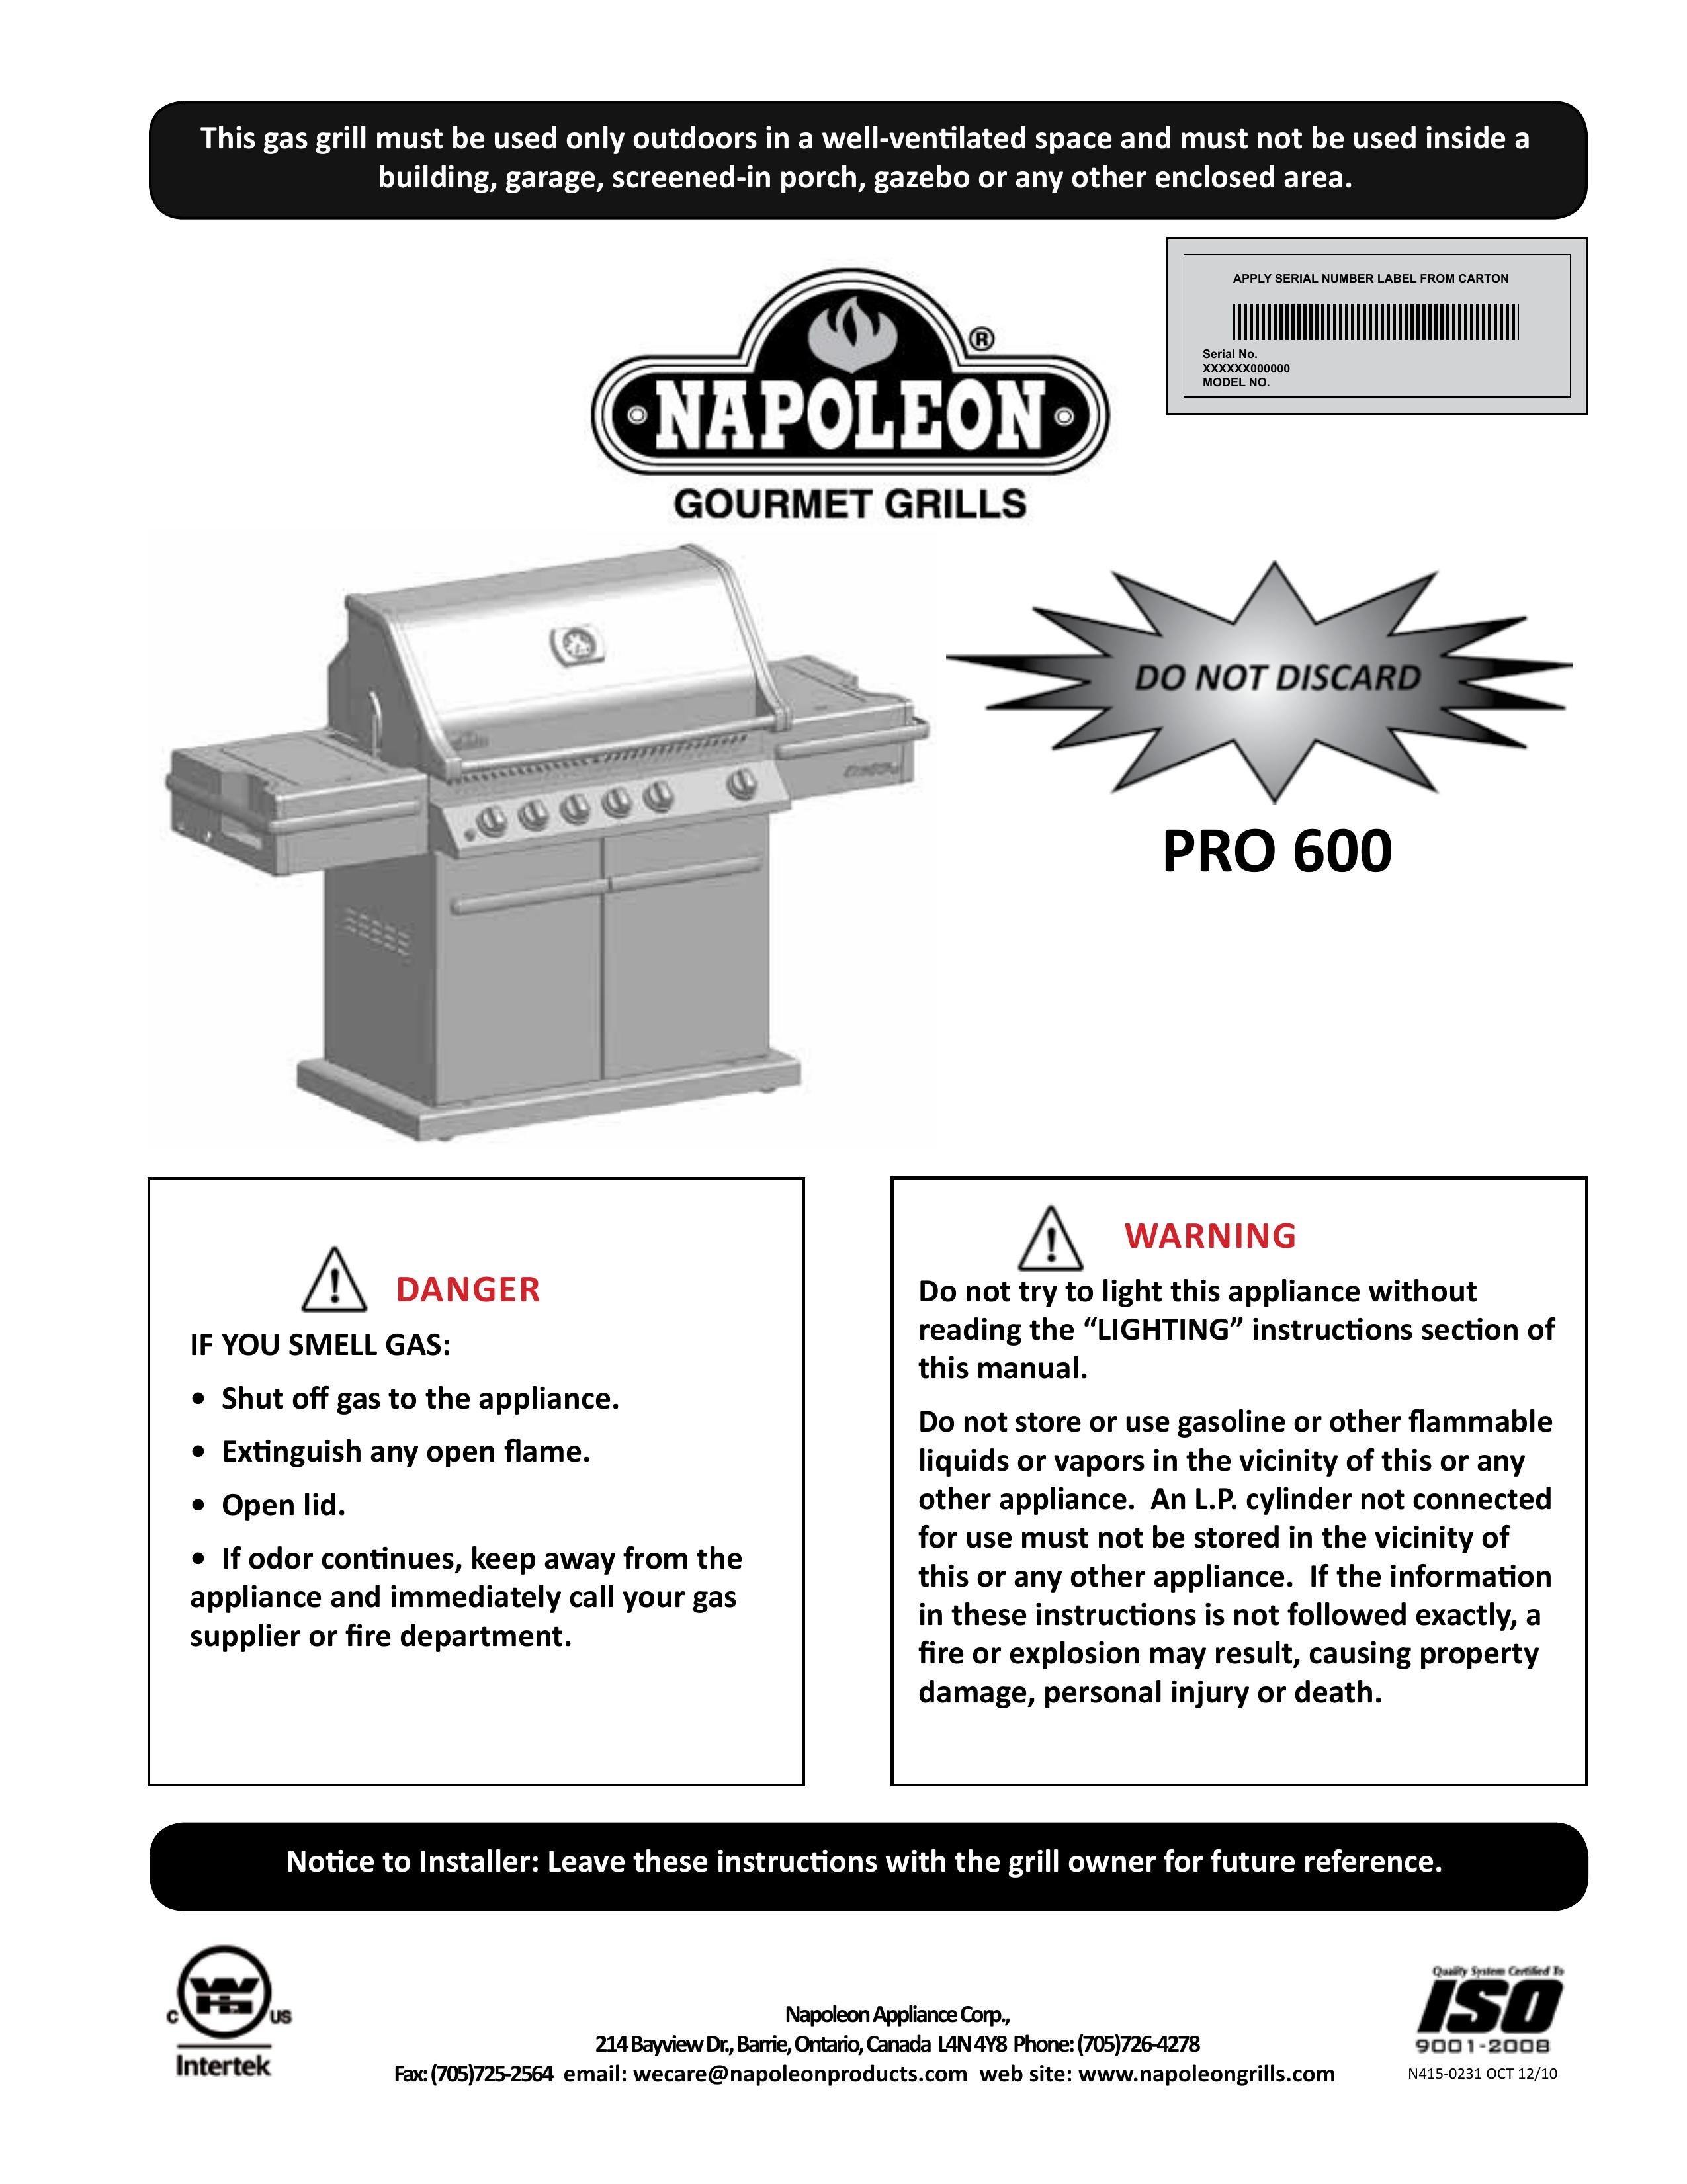 Napoleon Grills PRO 600 Gas Grill User Manual